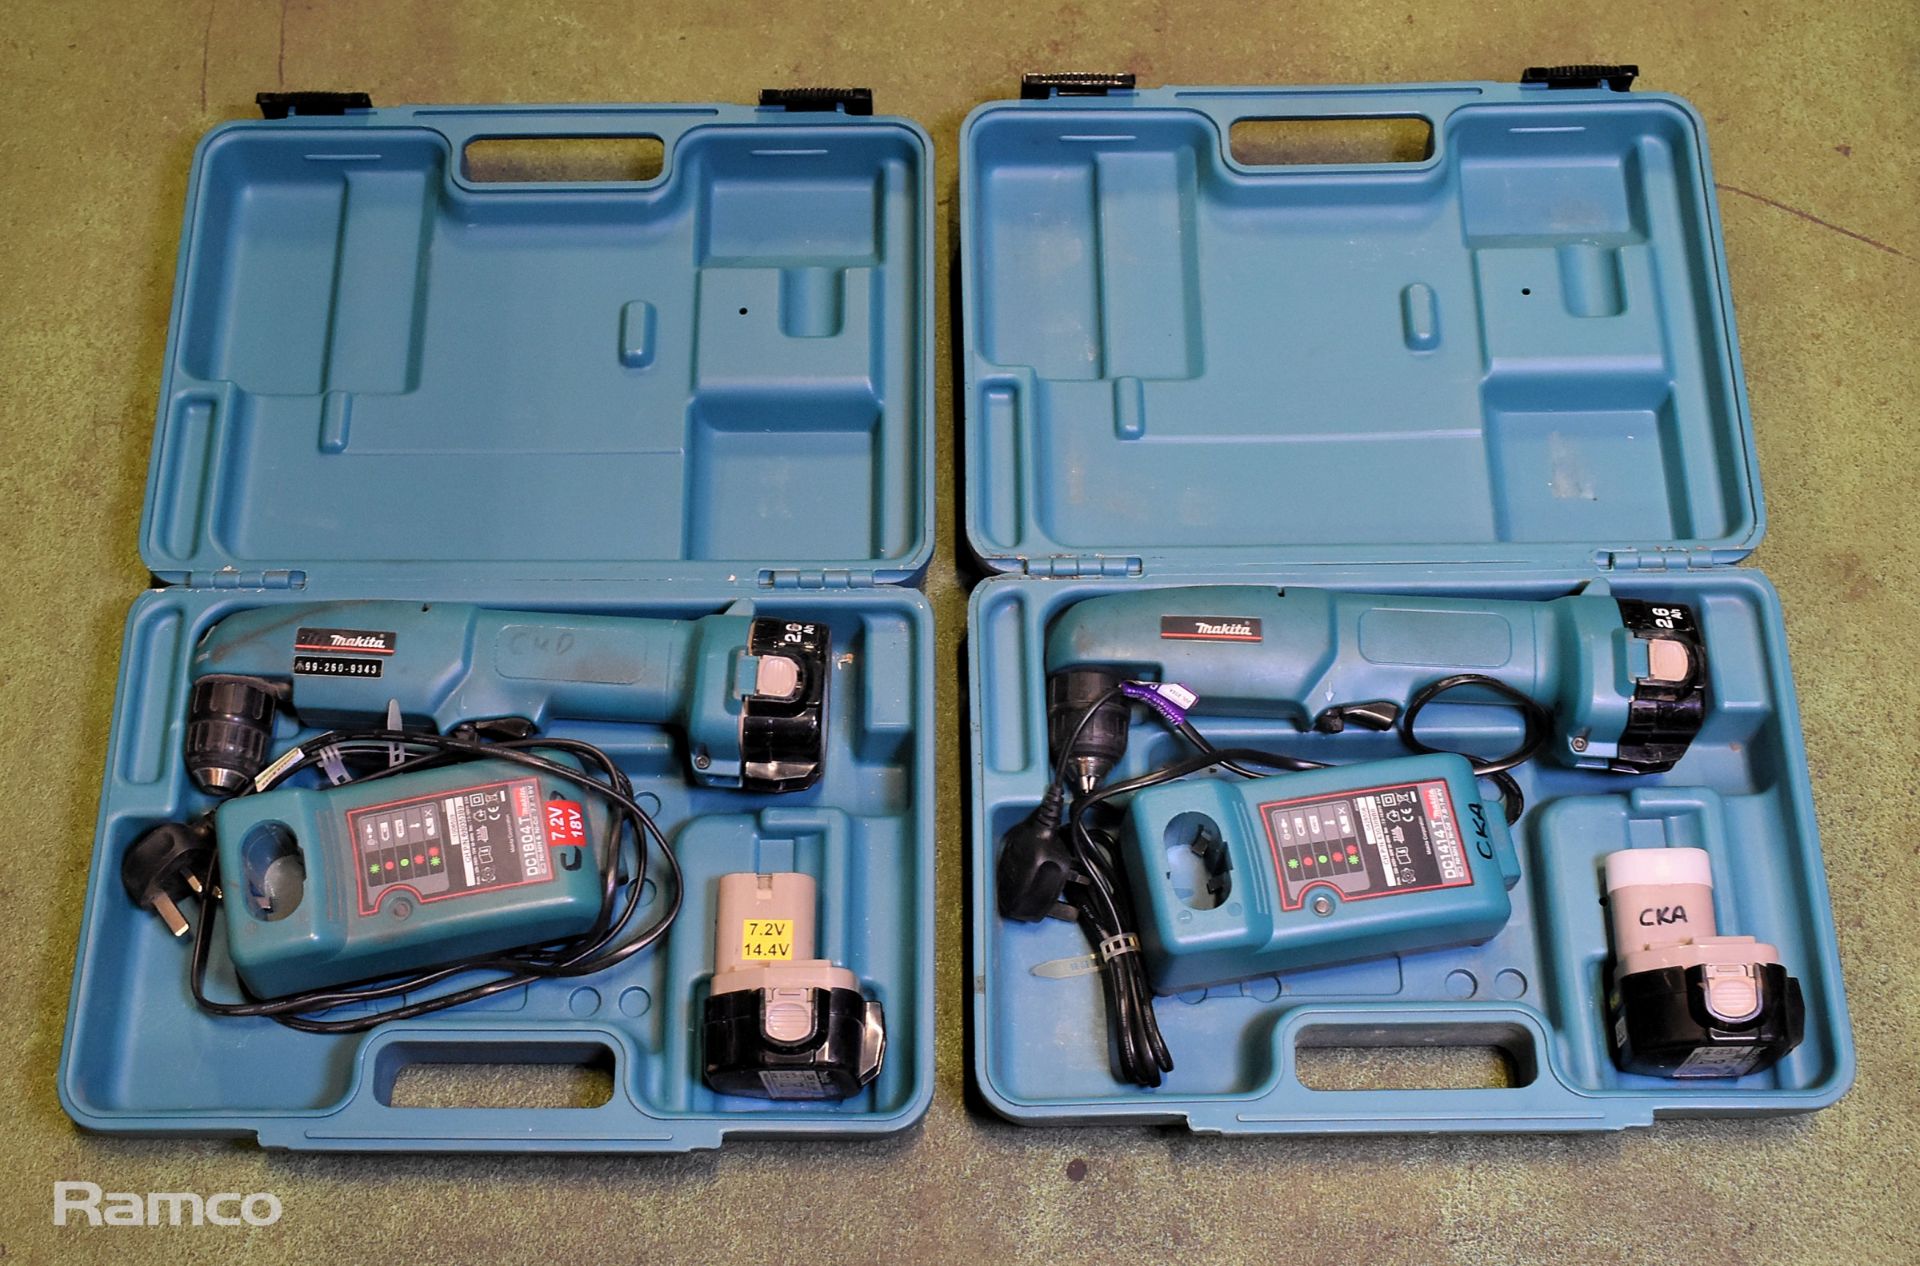 2x Makita DA312D 12V cordless 90 degrees angle drills with charger, 2 x batteries and case